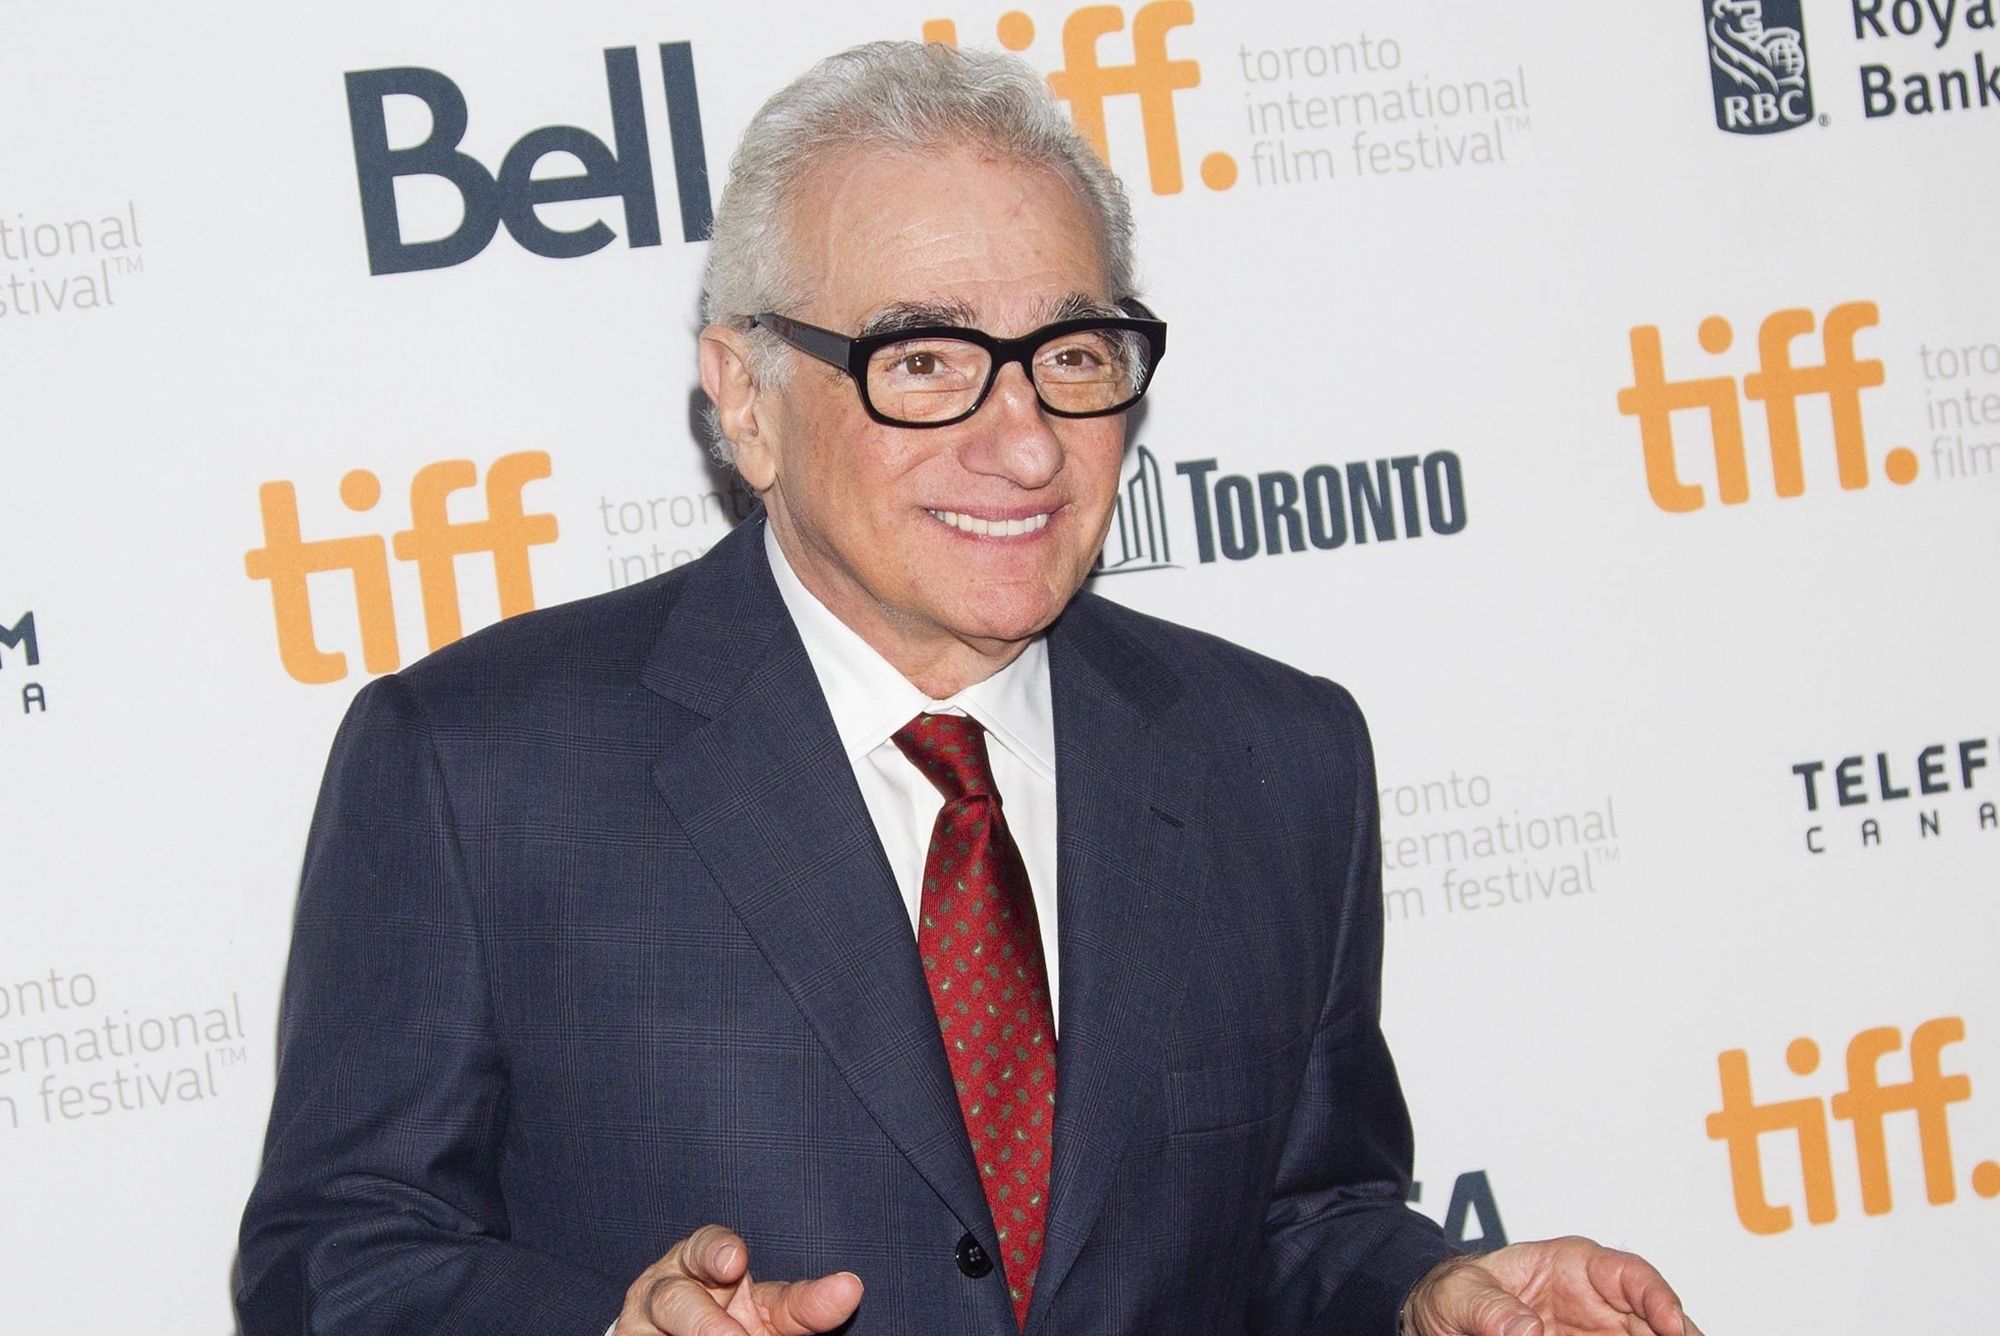 Martin Scorsese’s daughter trolls him with Marvel wrapping paper